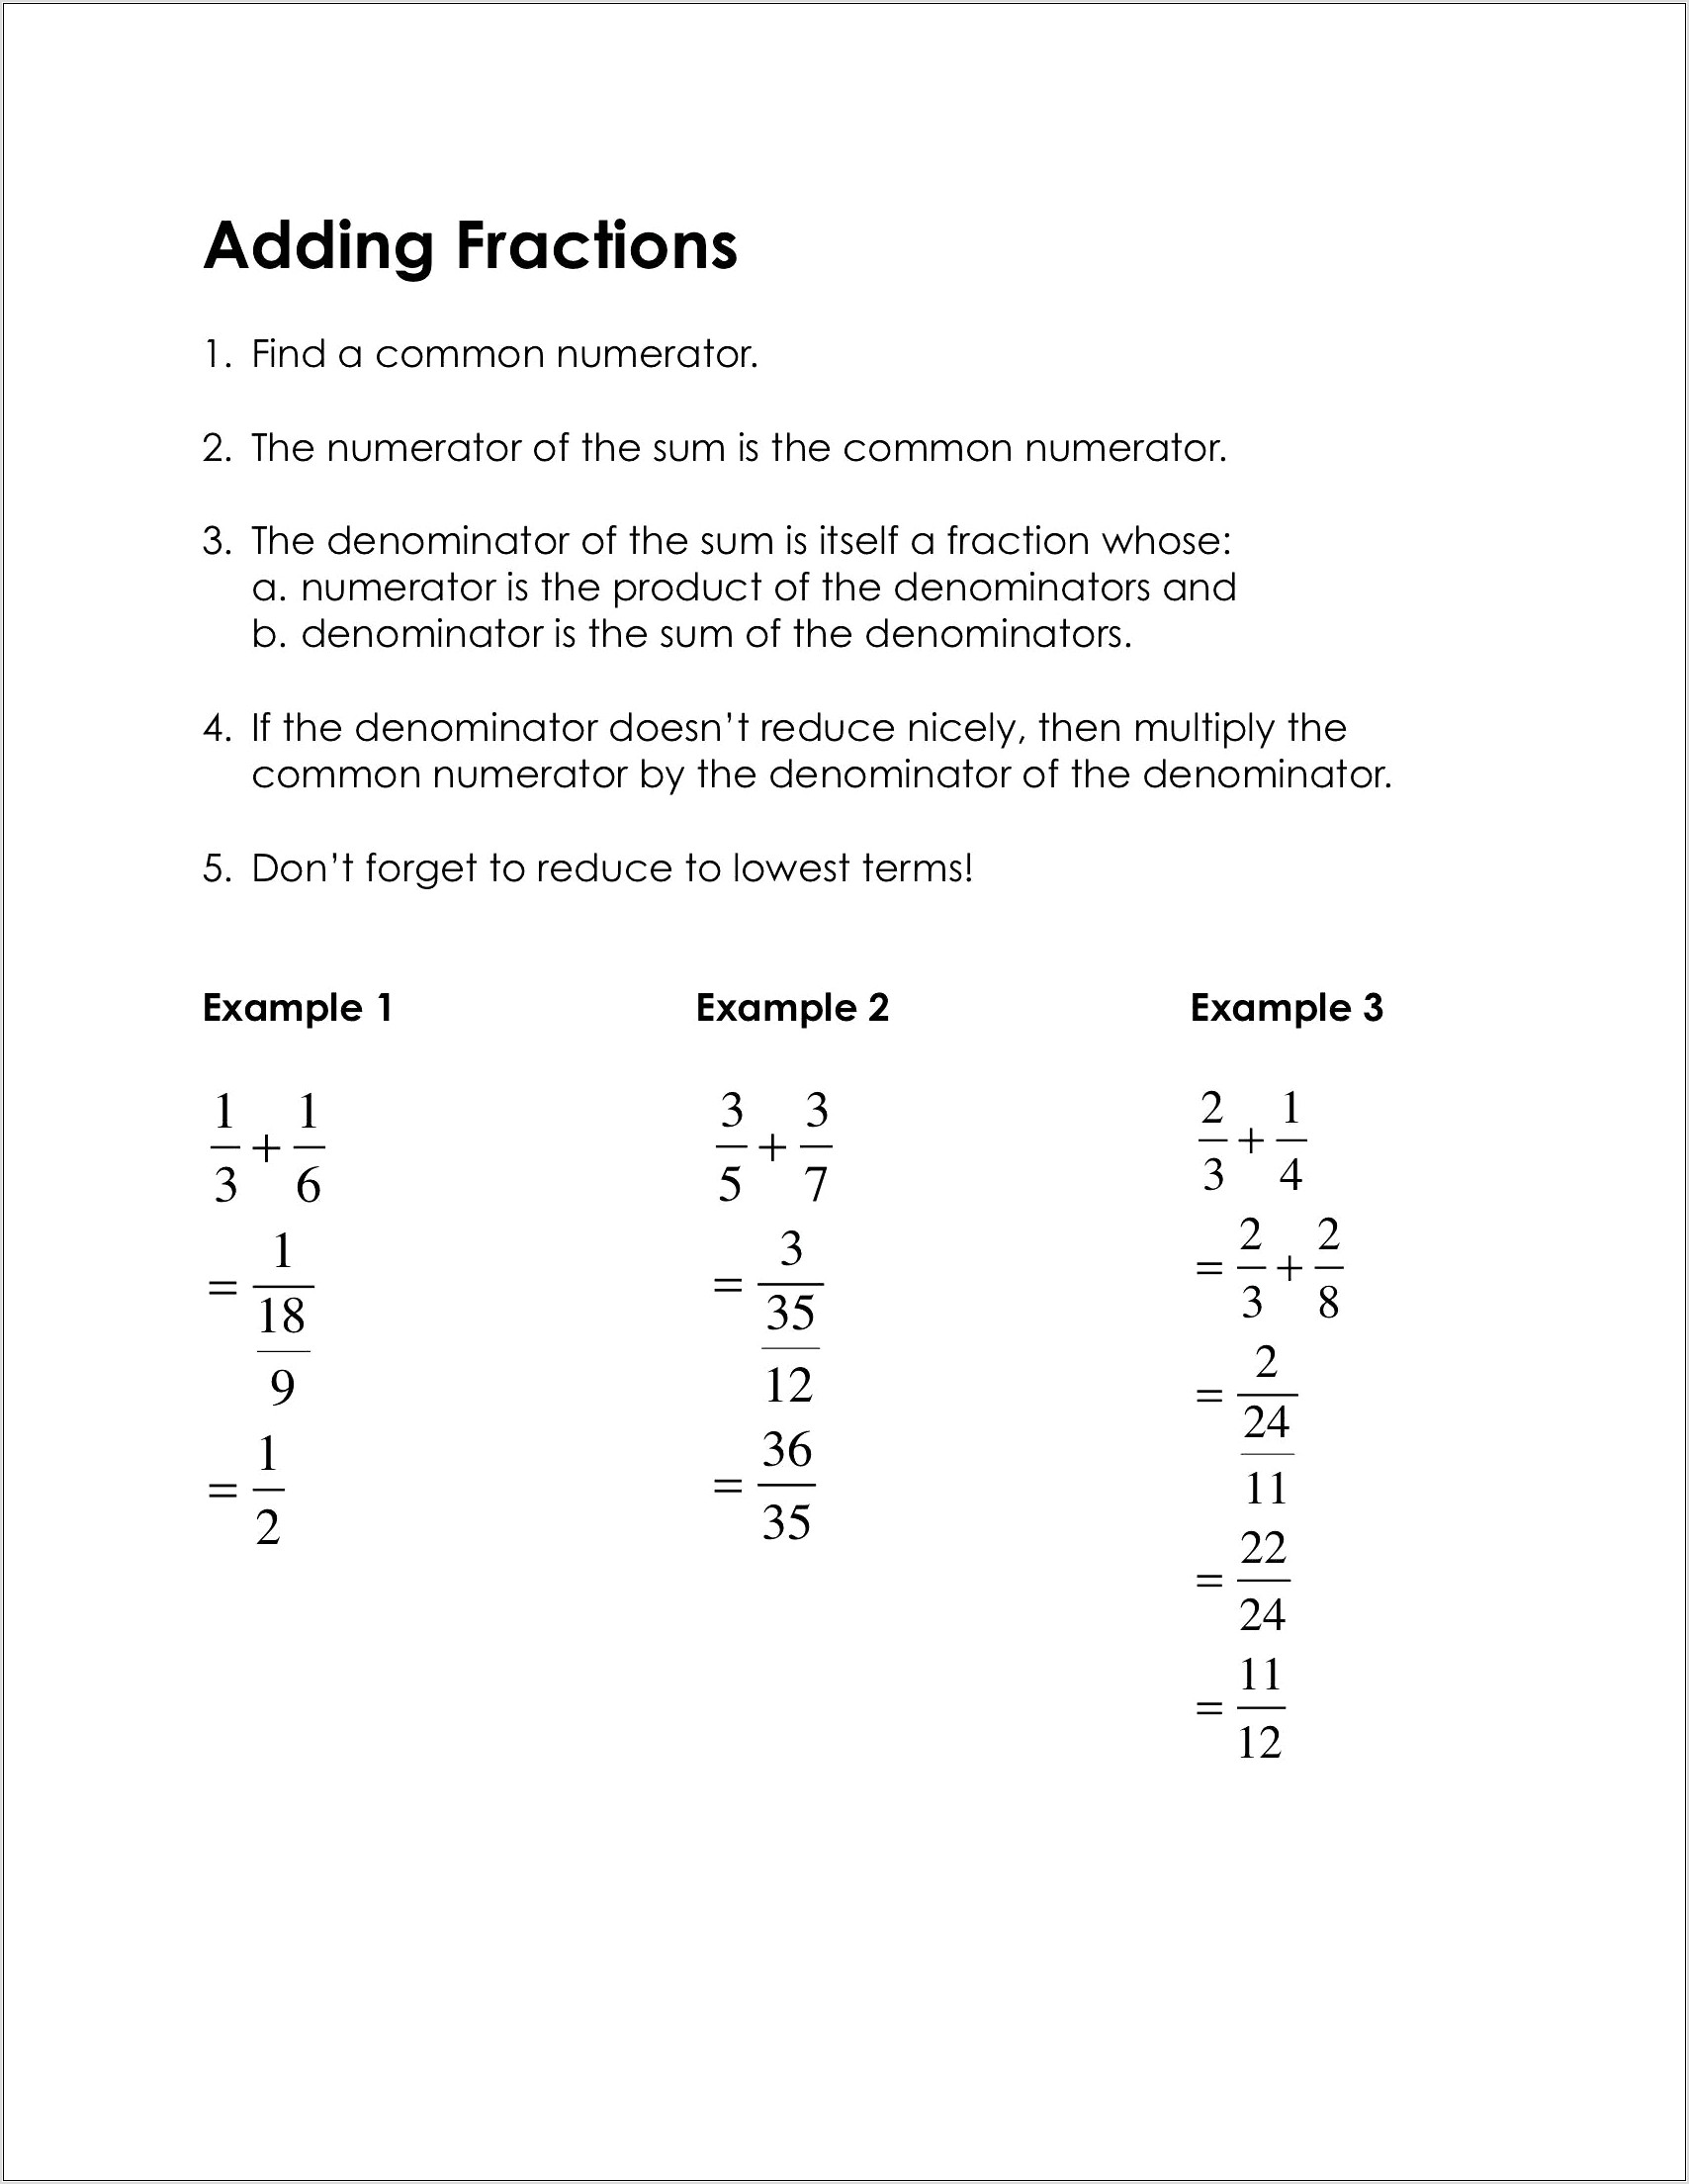 Worksheet Fractions In Lowest Terms